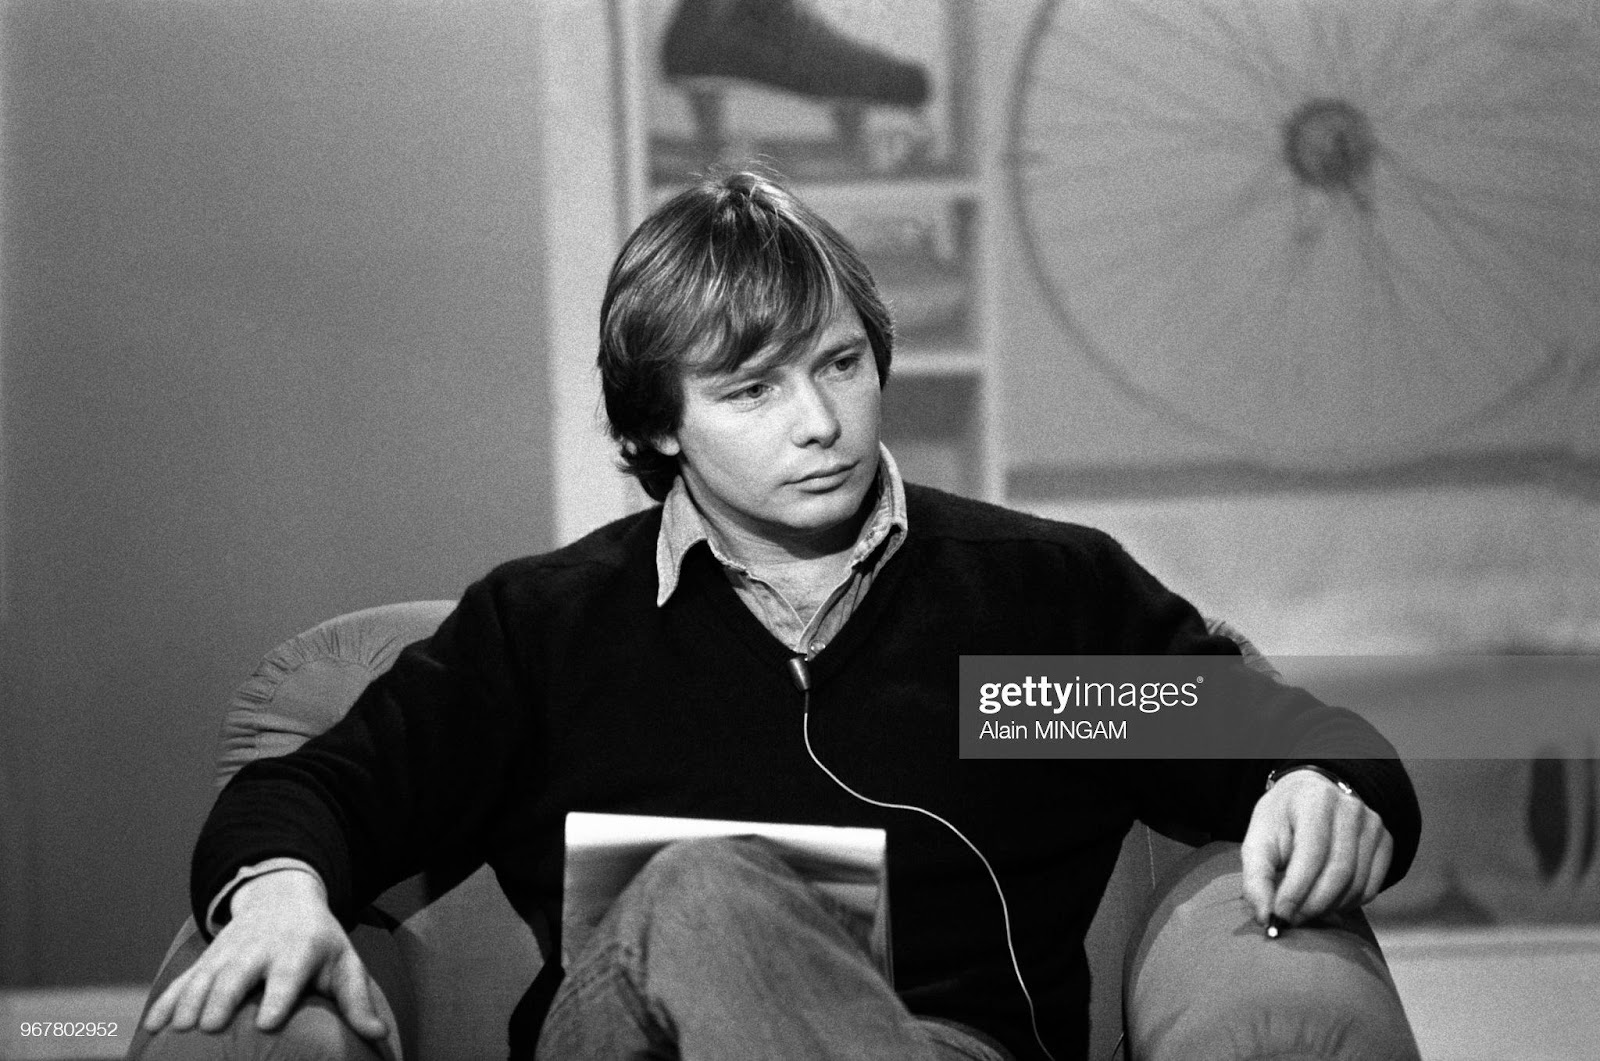 Didier Pironi on the set of an Antenne 2 program in Paris on January 30, 1982.